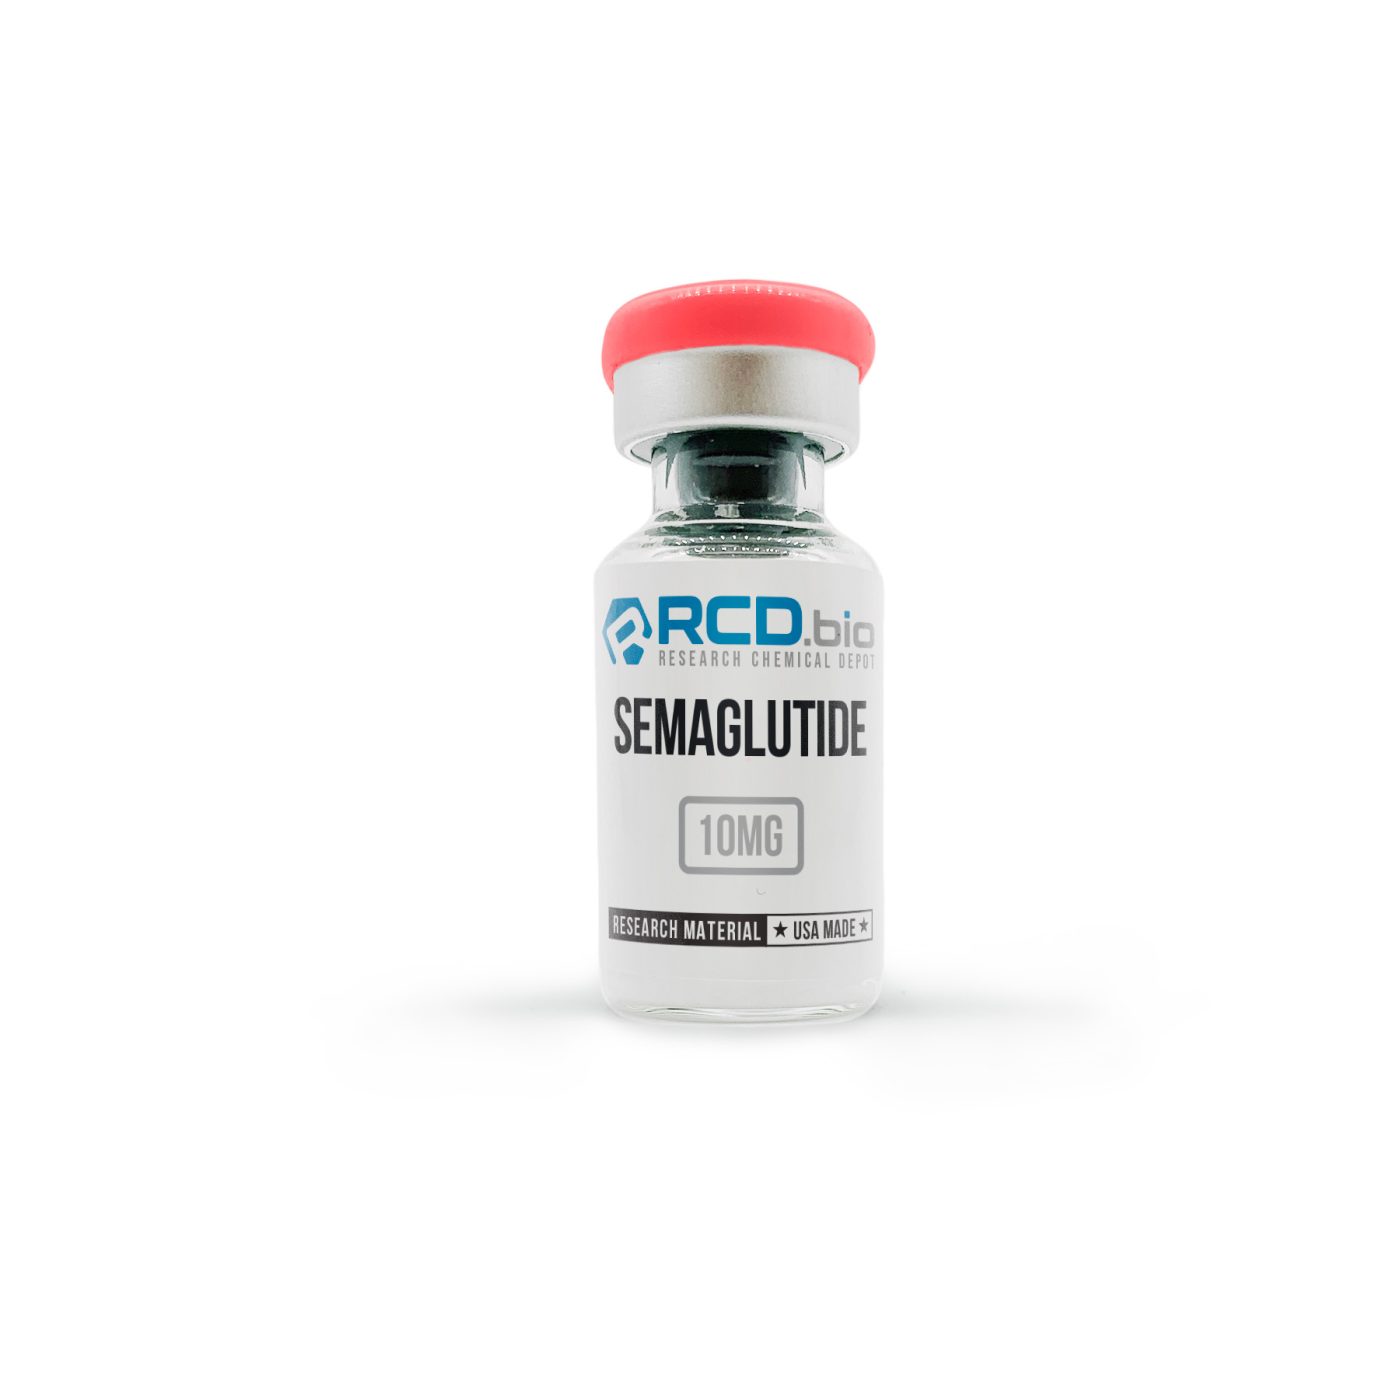 Where Can You Buy Semaglutide Online